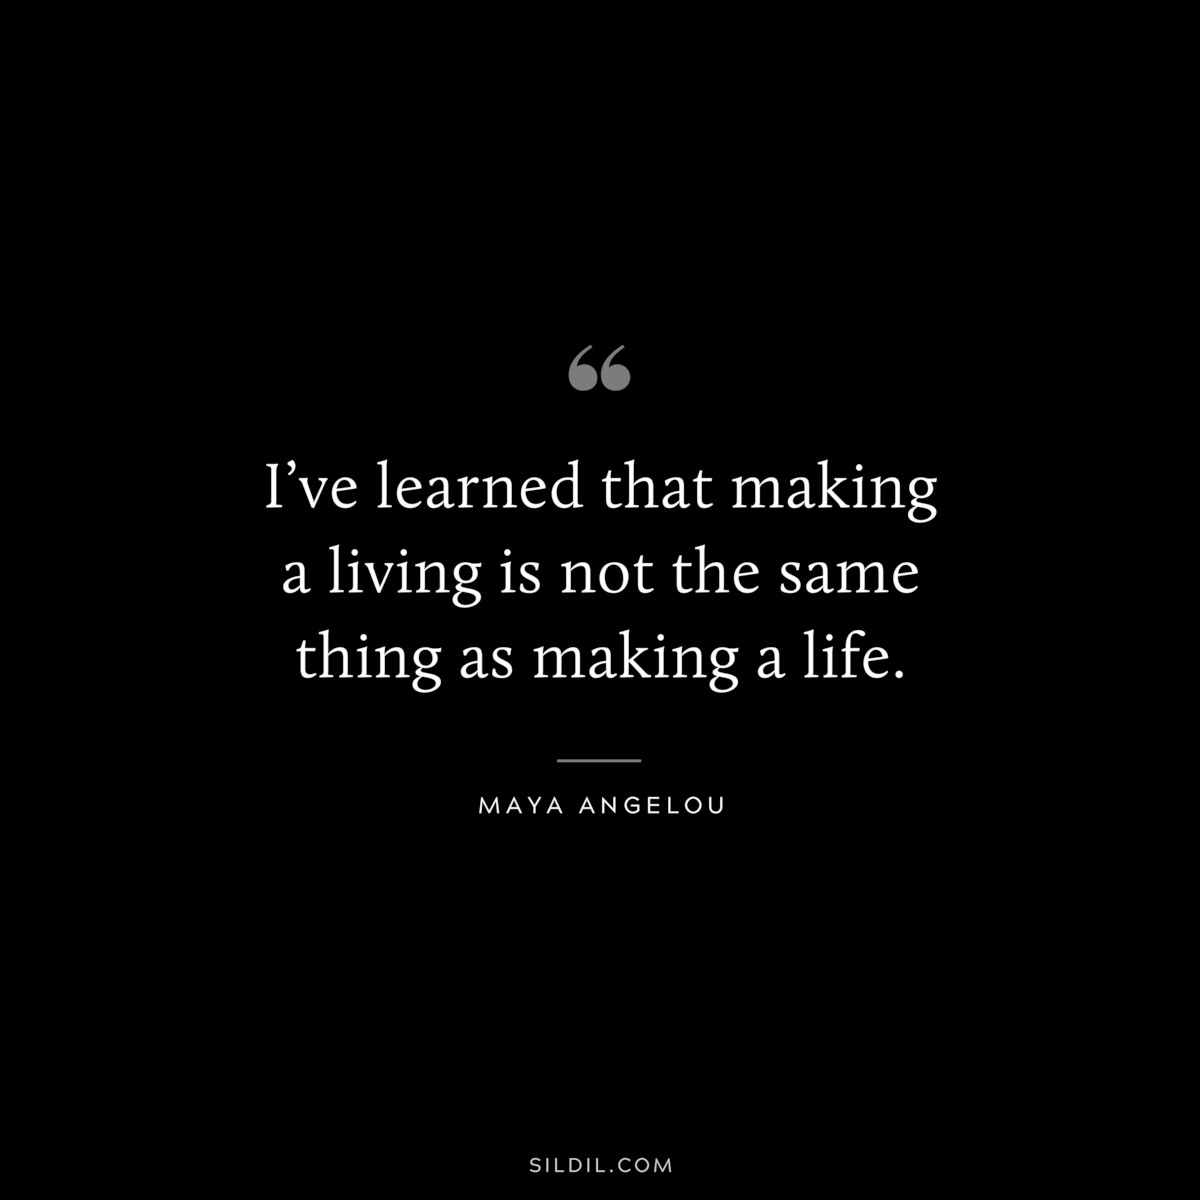 I’ve learned that making a living is not the same thing as making a life. ― Maya Angelou